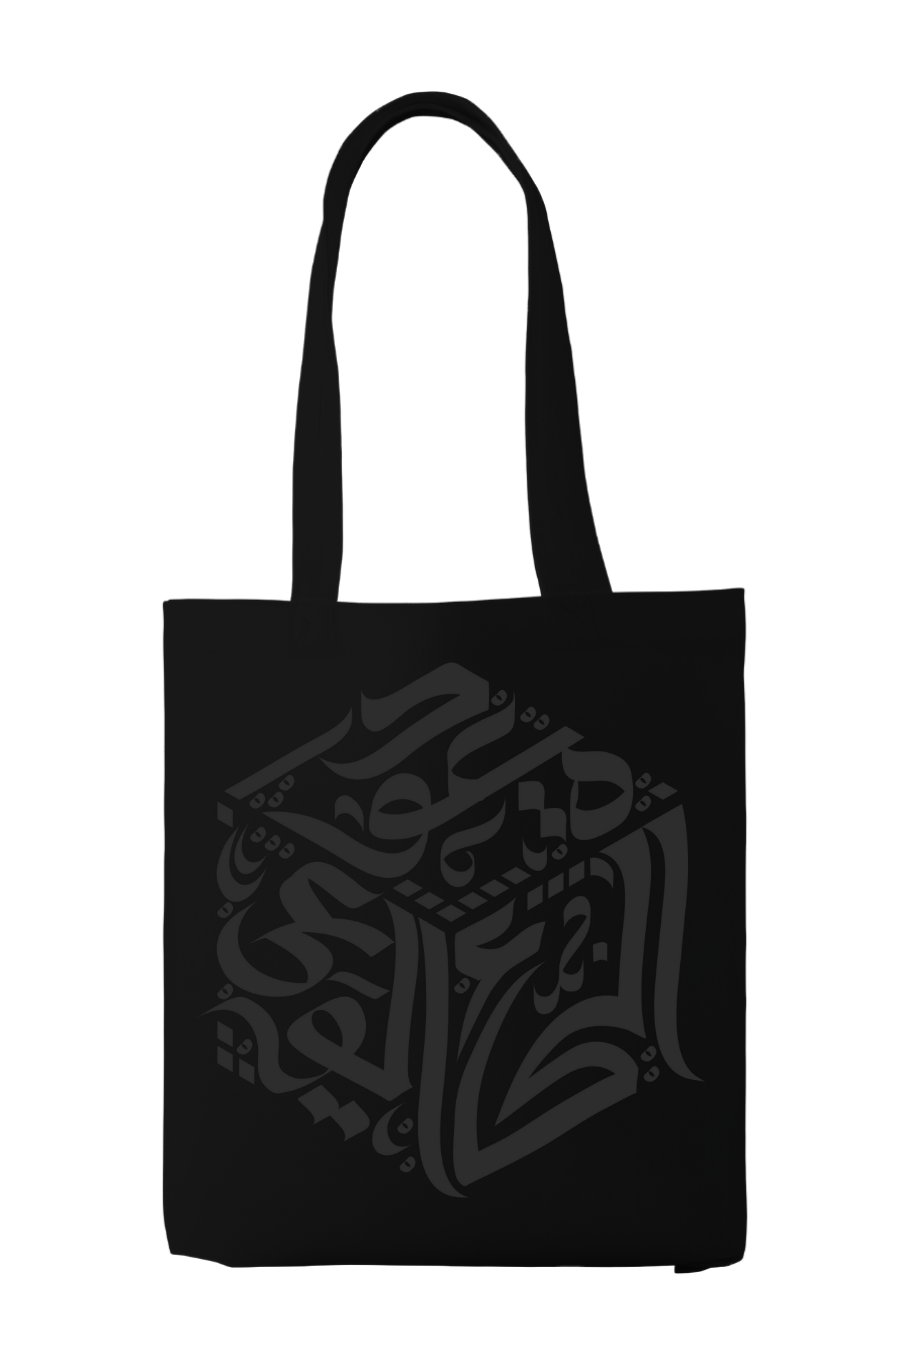 A.B.E. (All Black Everything) Tote